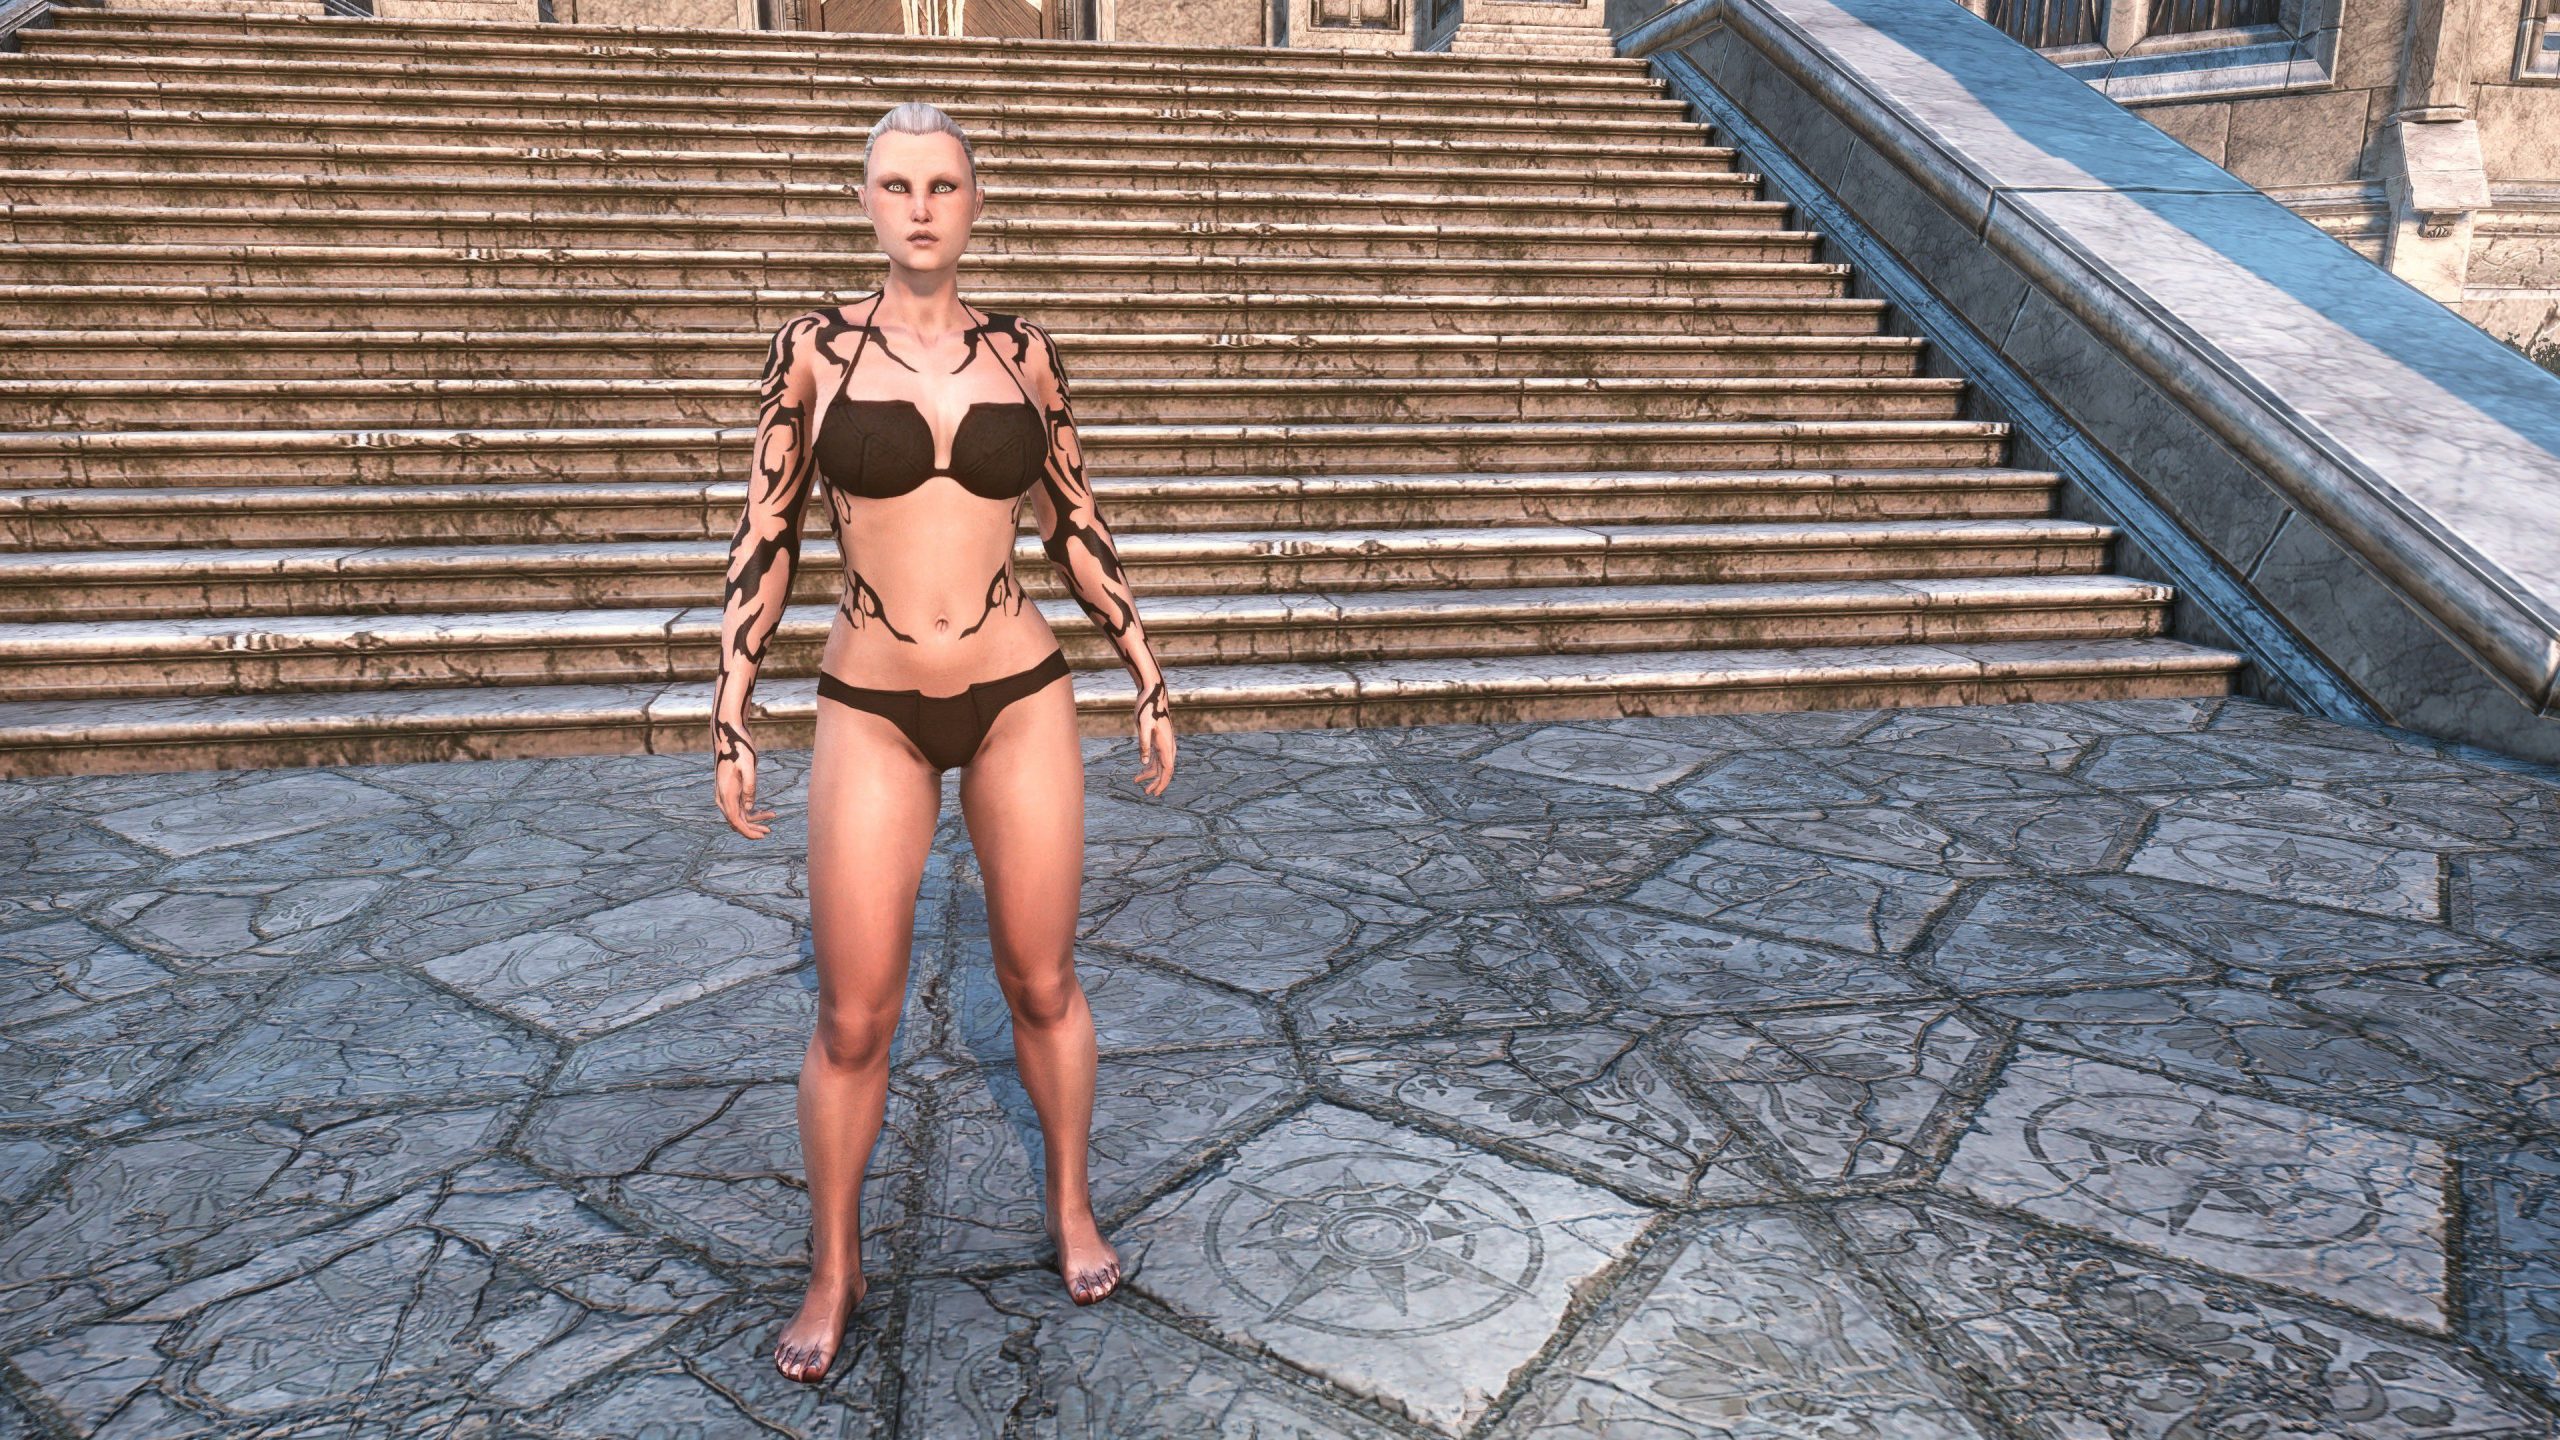 wyrd-root-tattoos-wild-hunt-crow-crate-the-older-scrolls-online-8279220